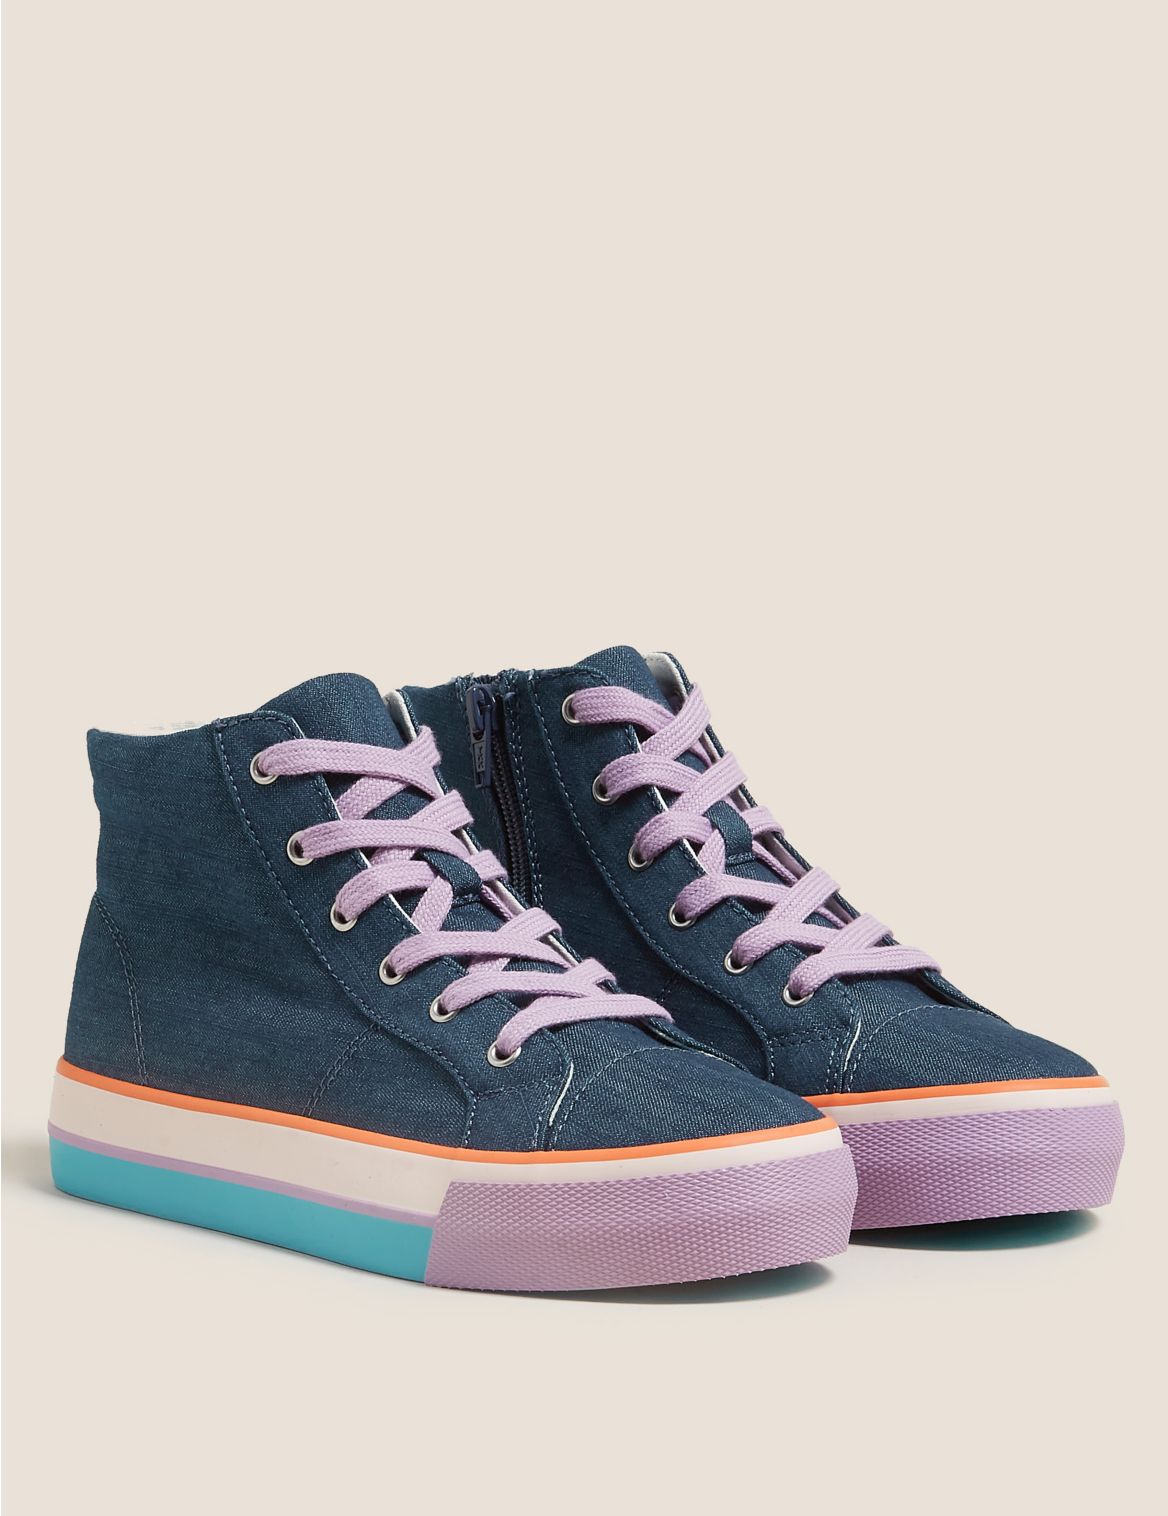 Kids' Denim Rainbow High Top Trainers (13 Small - 6 Large) navy